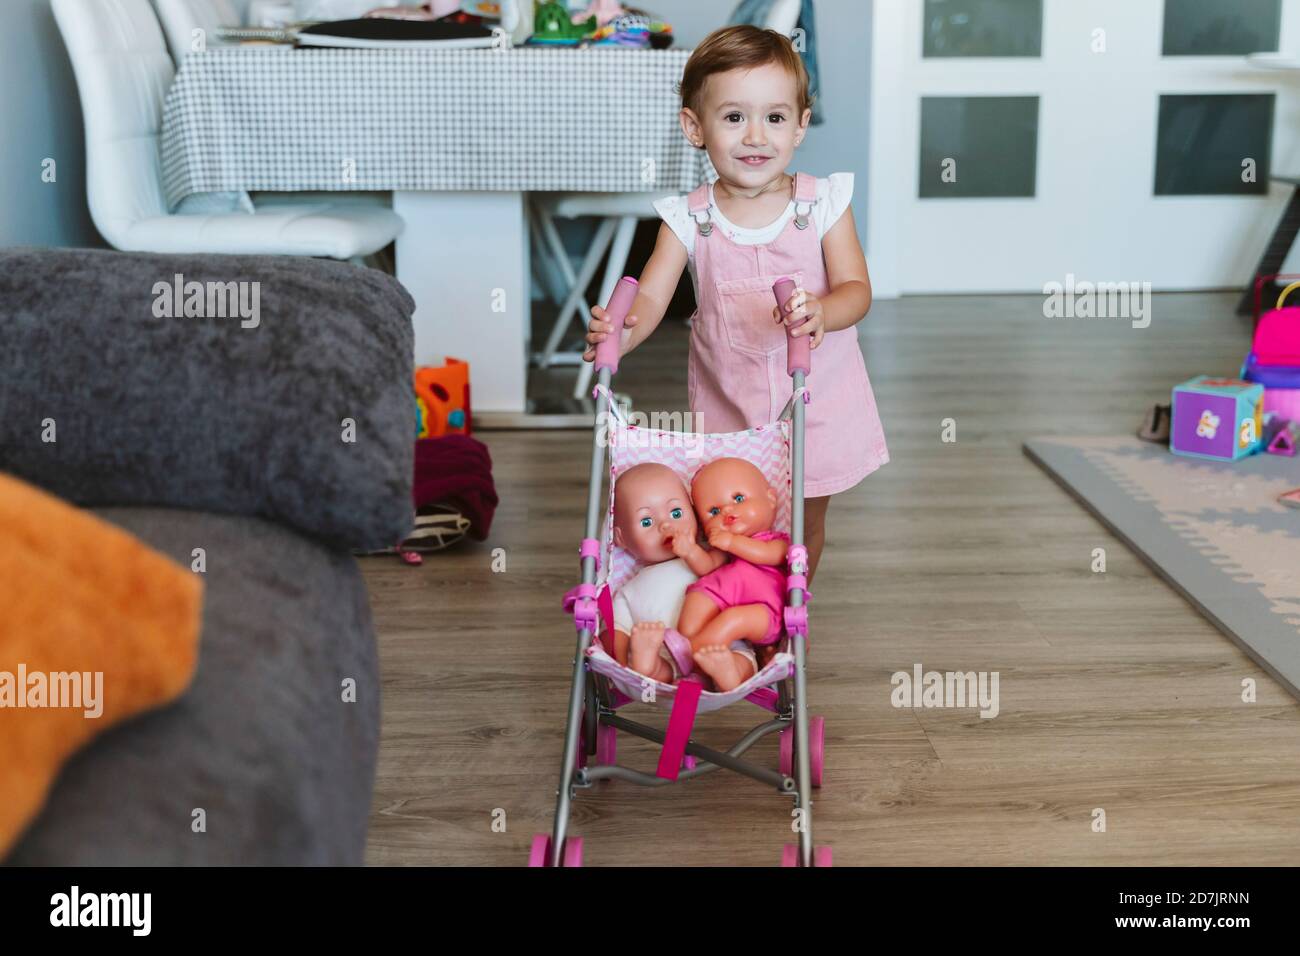 Baby girl playing with baby stroller and doll at home Stock Photo